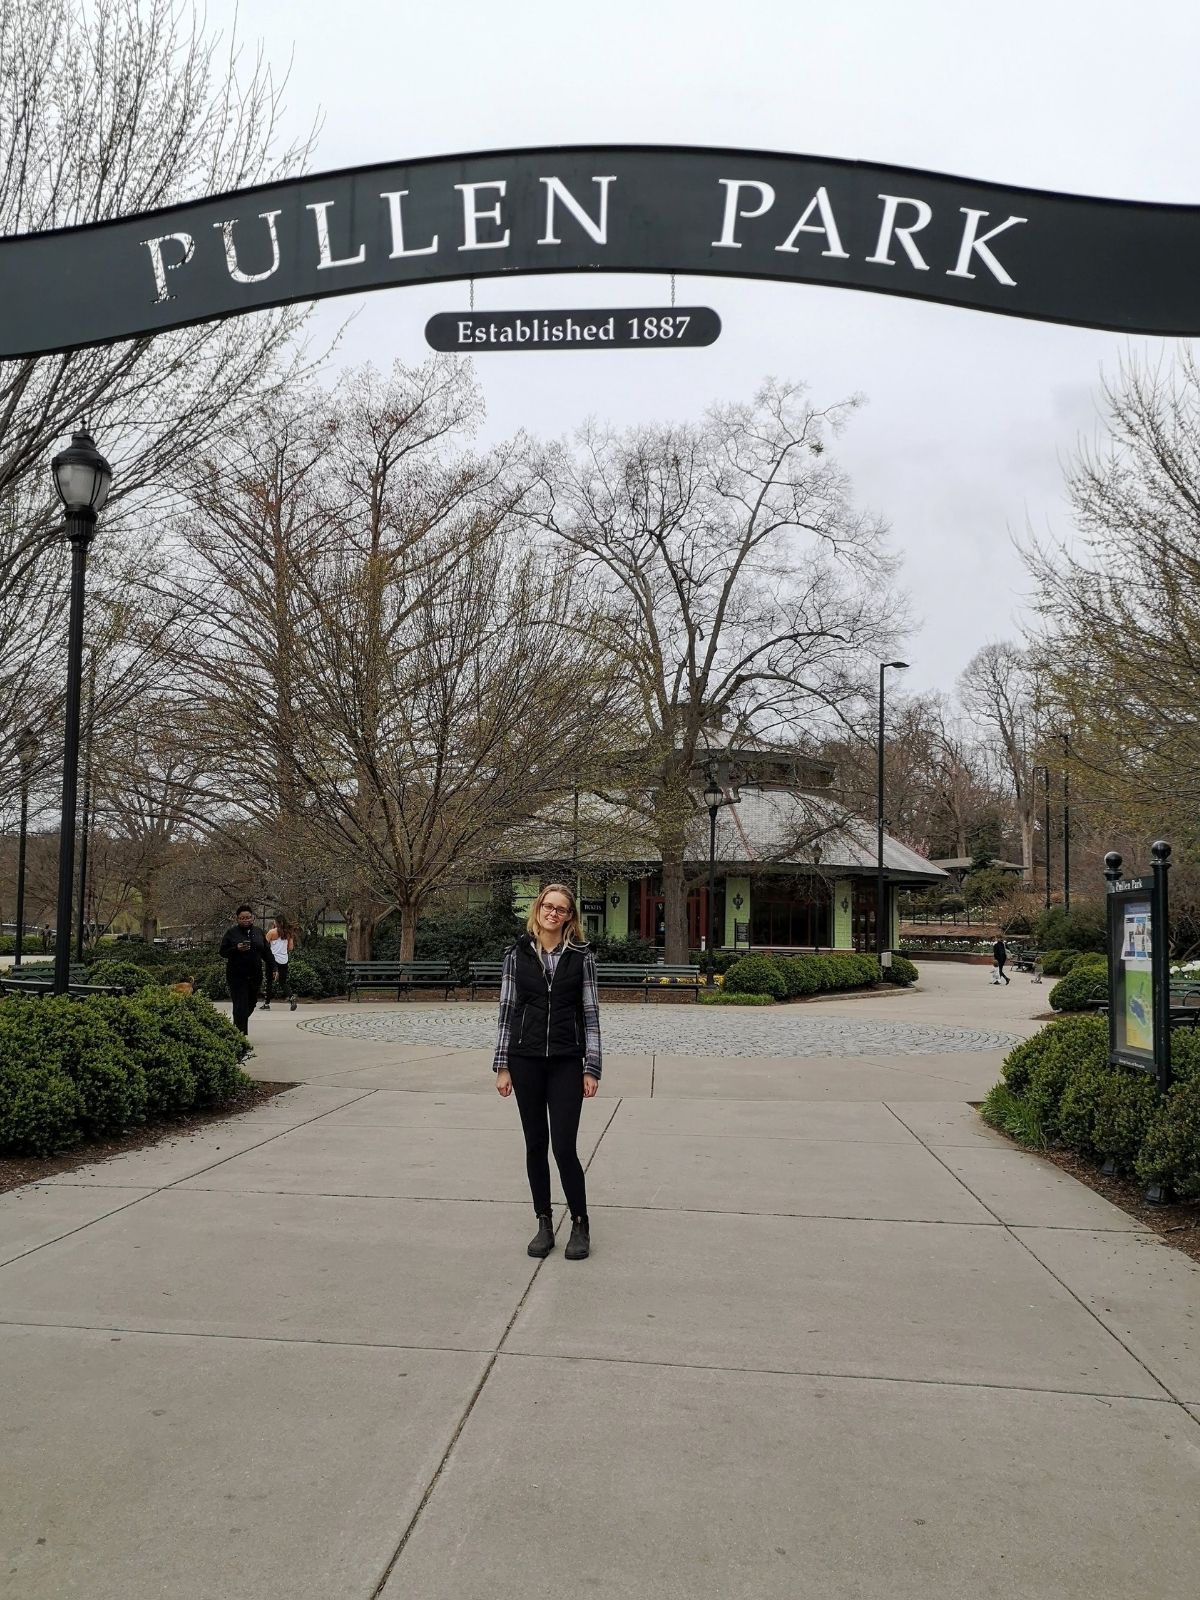 I am standing underneath the Pullen Park sign in Raleigh, North Carolina.